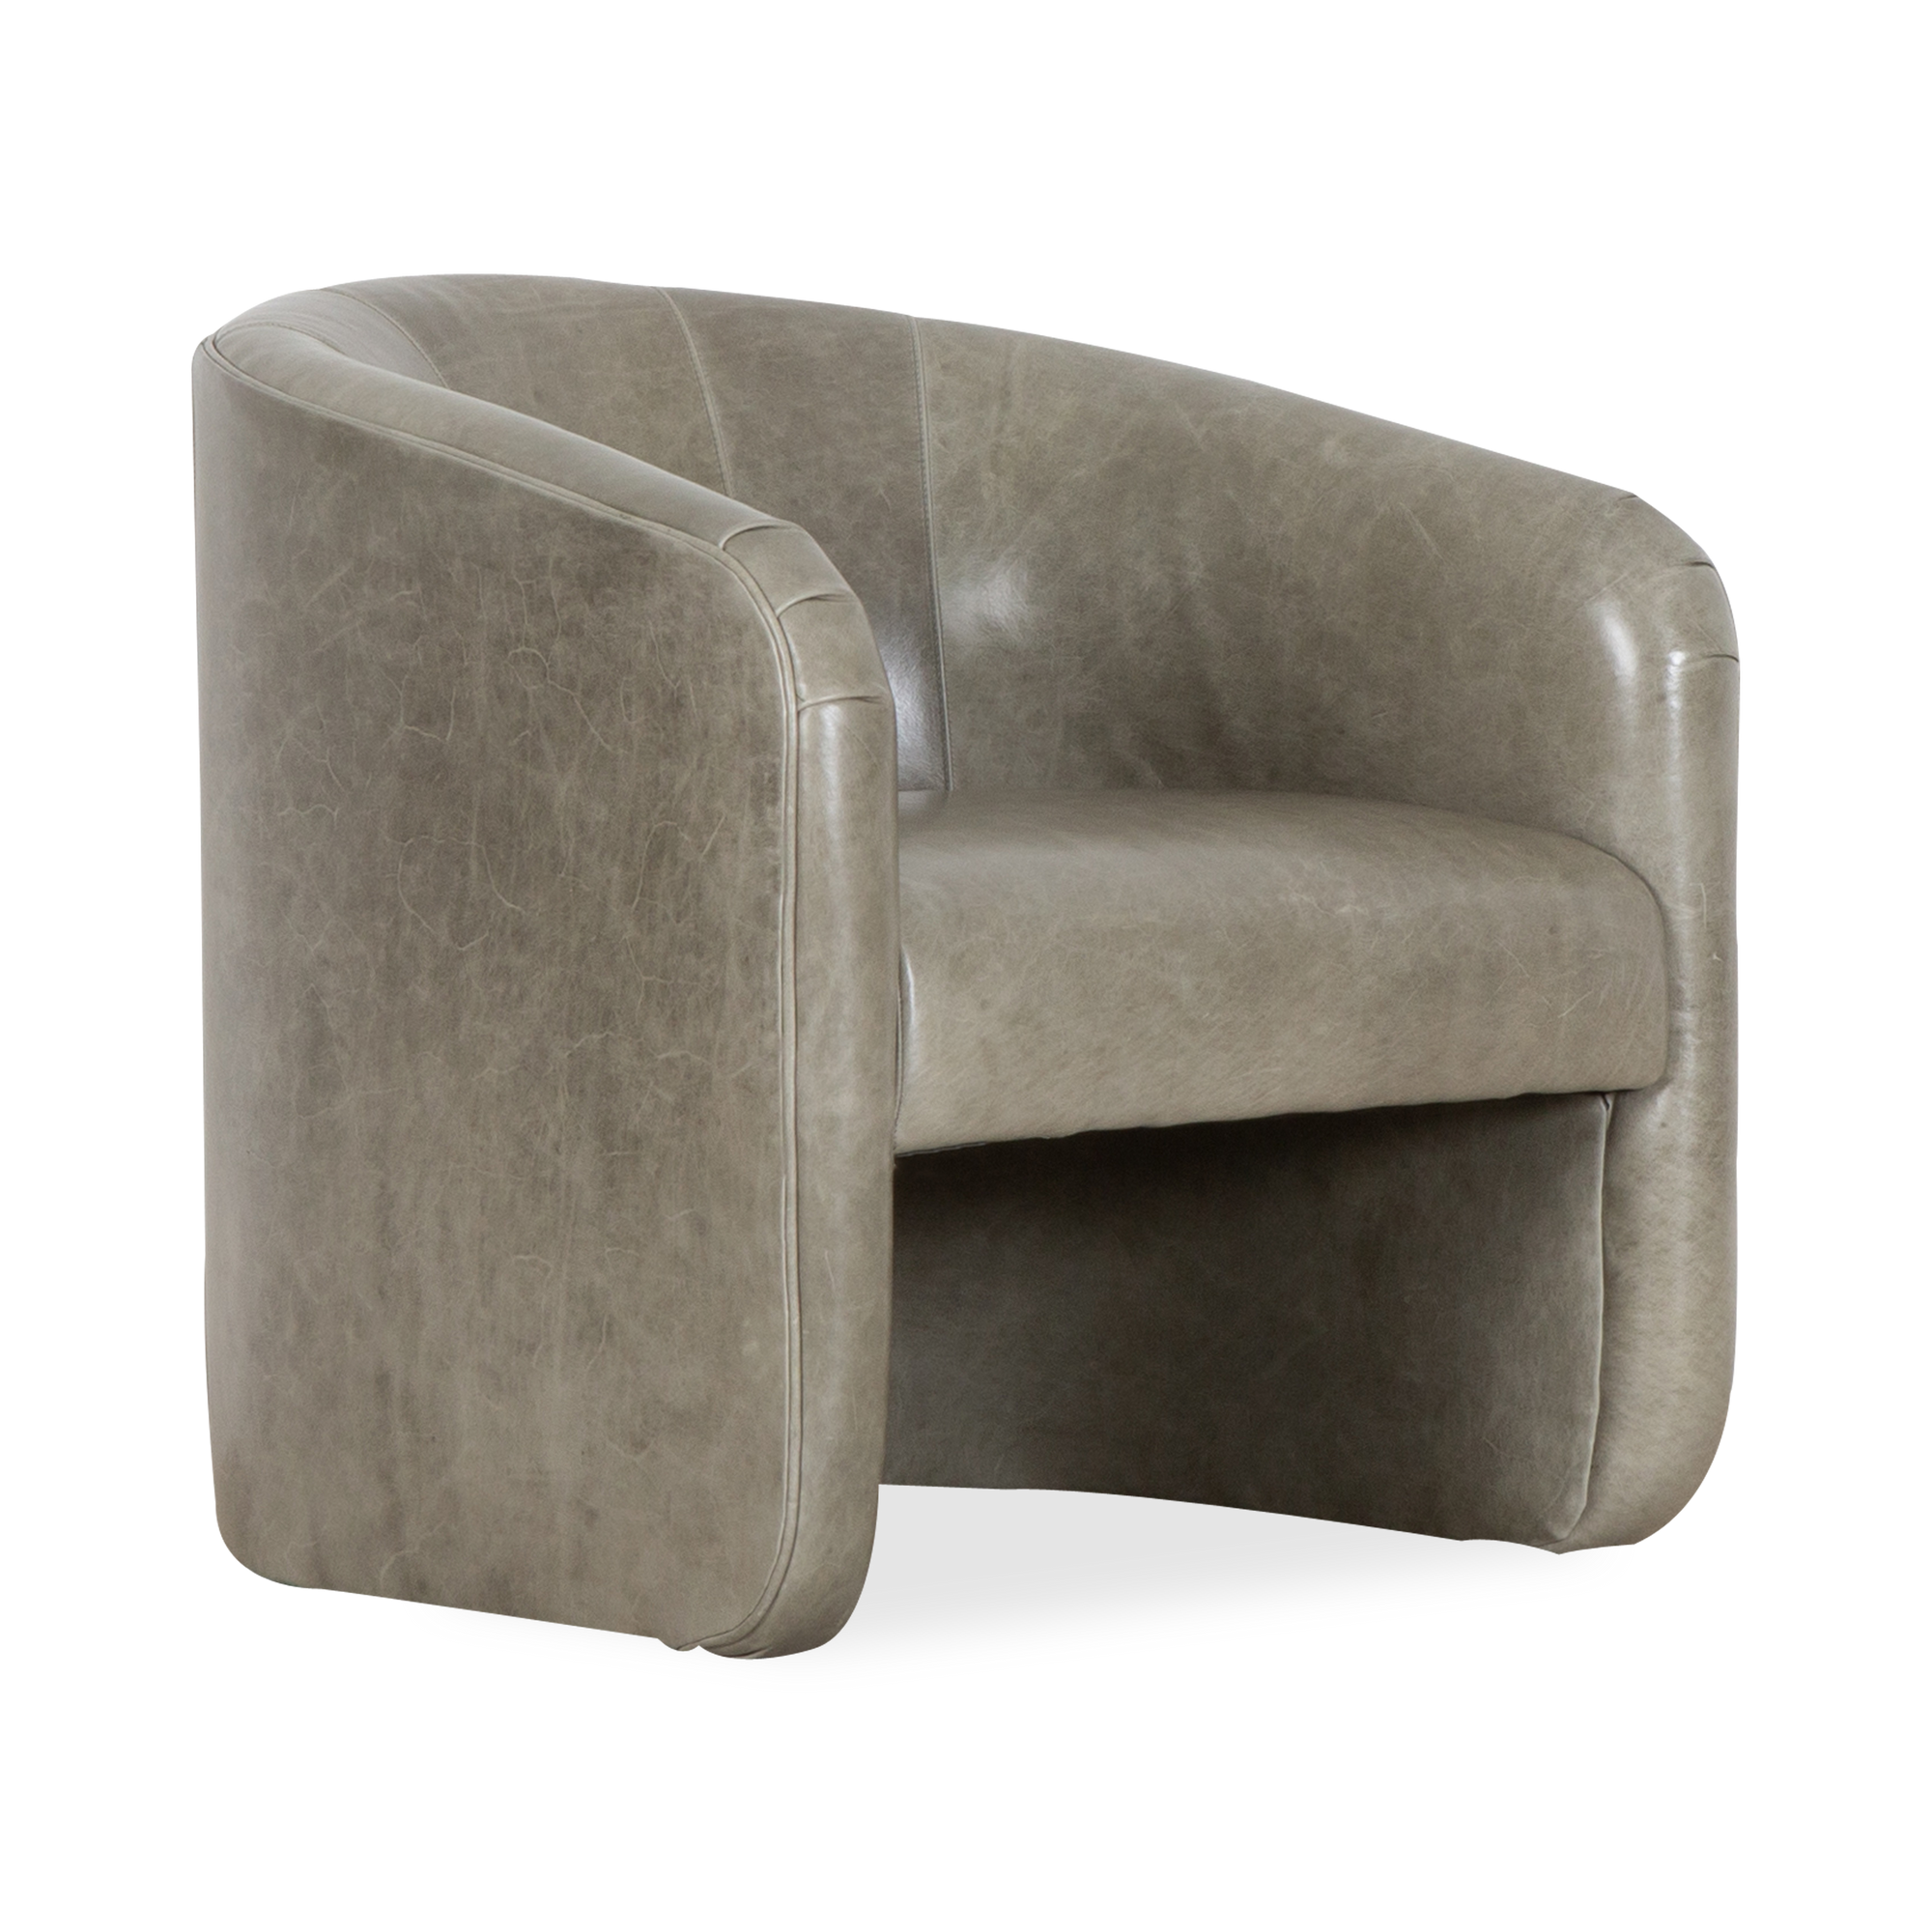 A contemporary edit on a classic style, the Capiz Lounge Chair offers the ultimate sophistication.